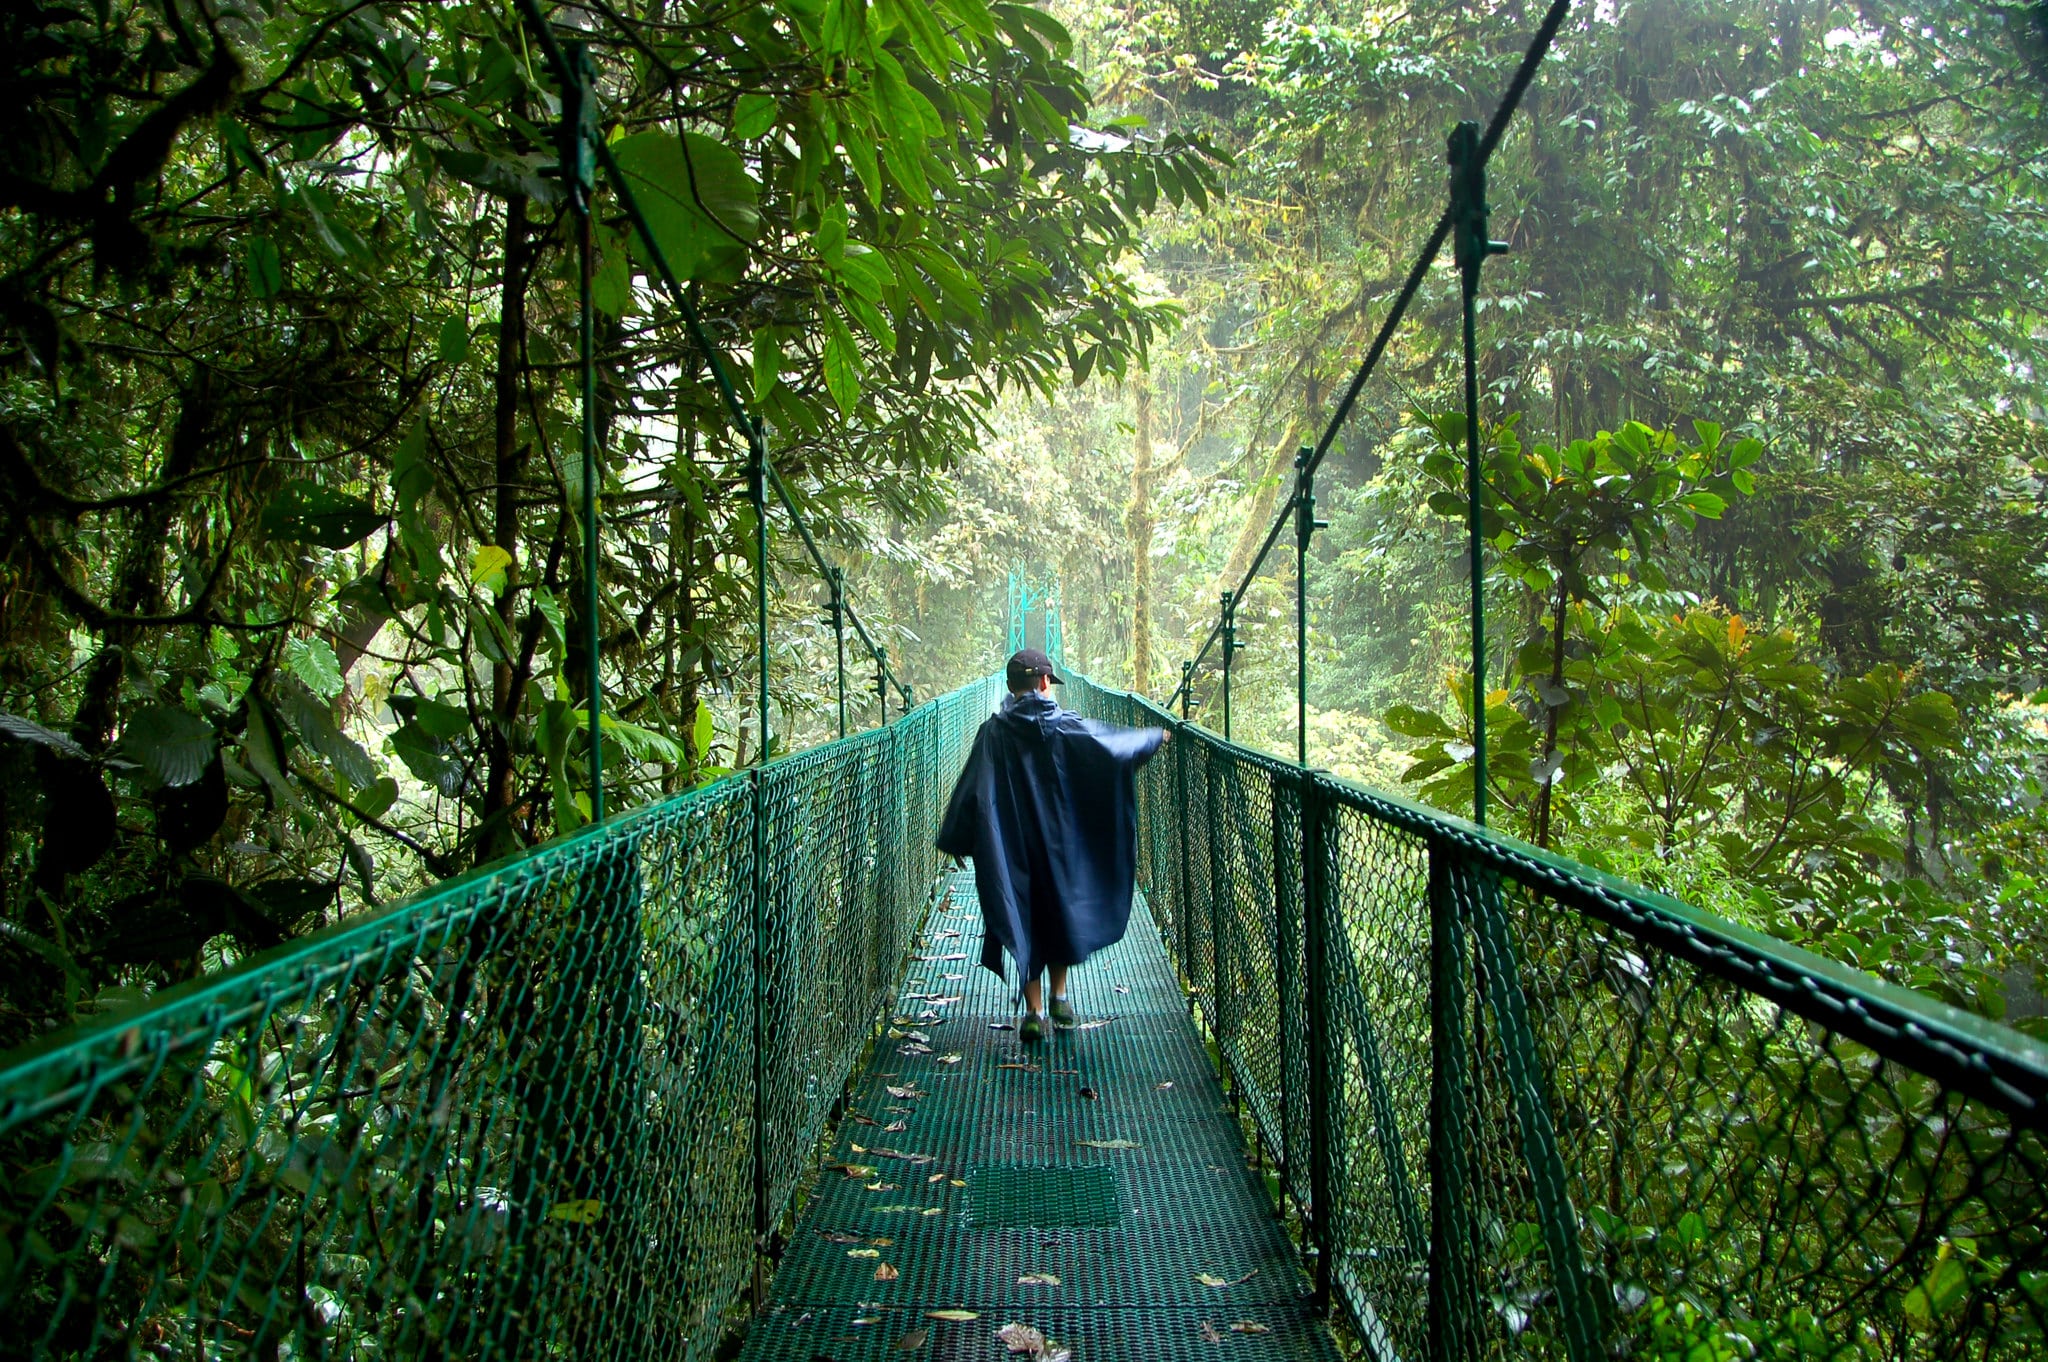 Where to stay in Costa Rica for amazing nature? Monteverde